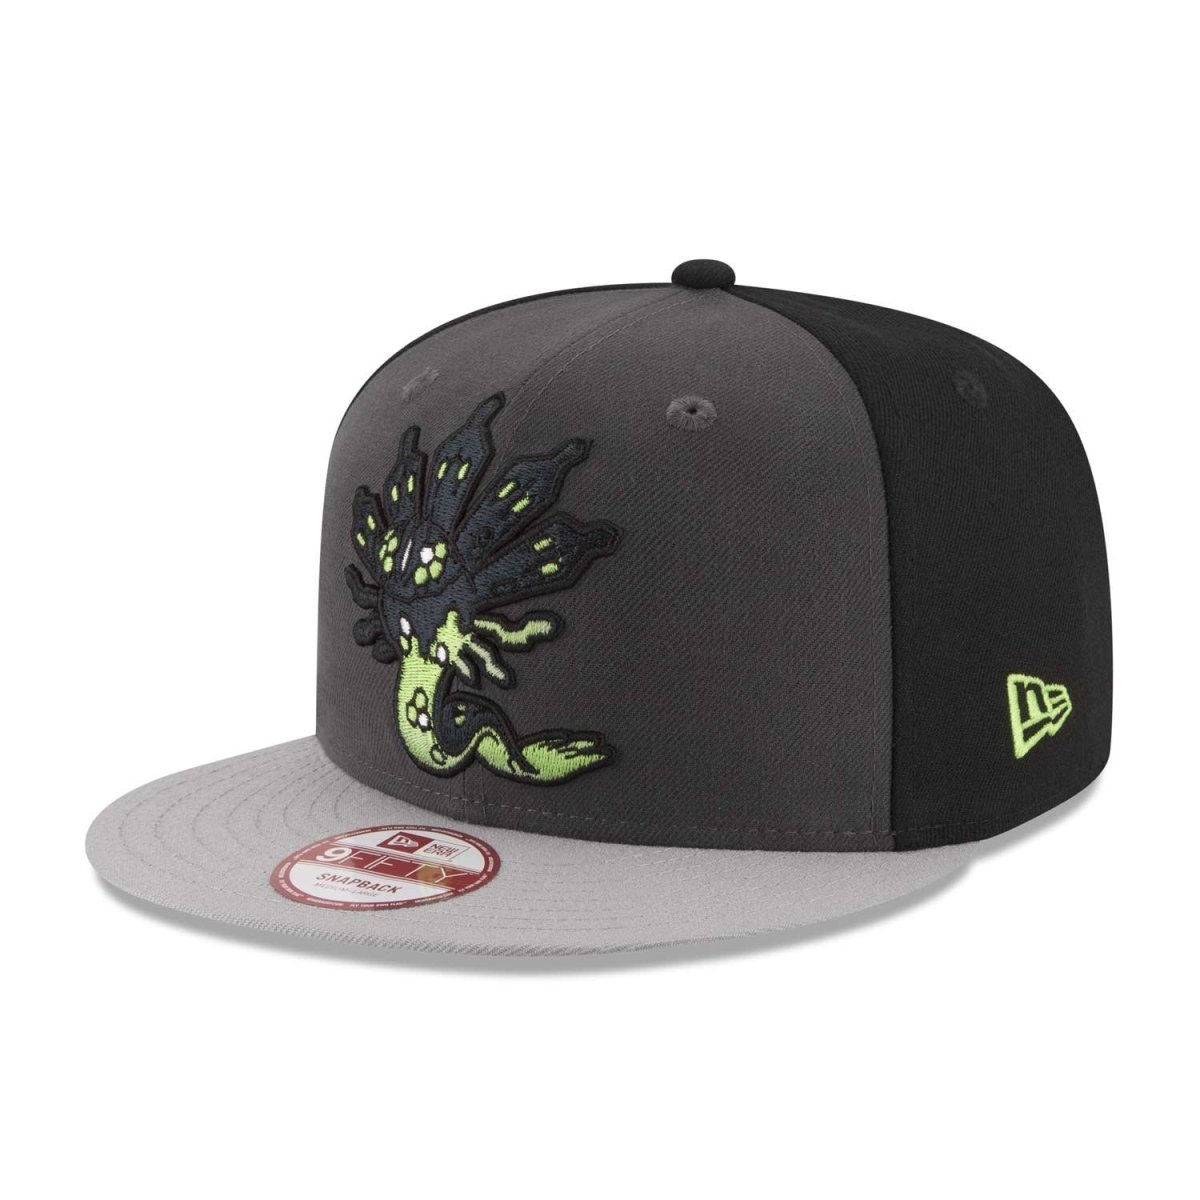 50% 9FIFTY Center (One Official Site by Zygarde Cap | Pokémon Era Baseball New Forme Size-Adult)